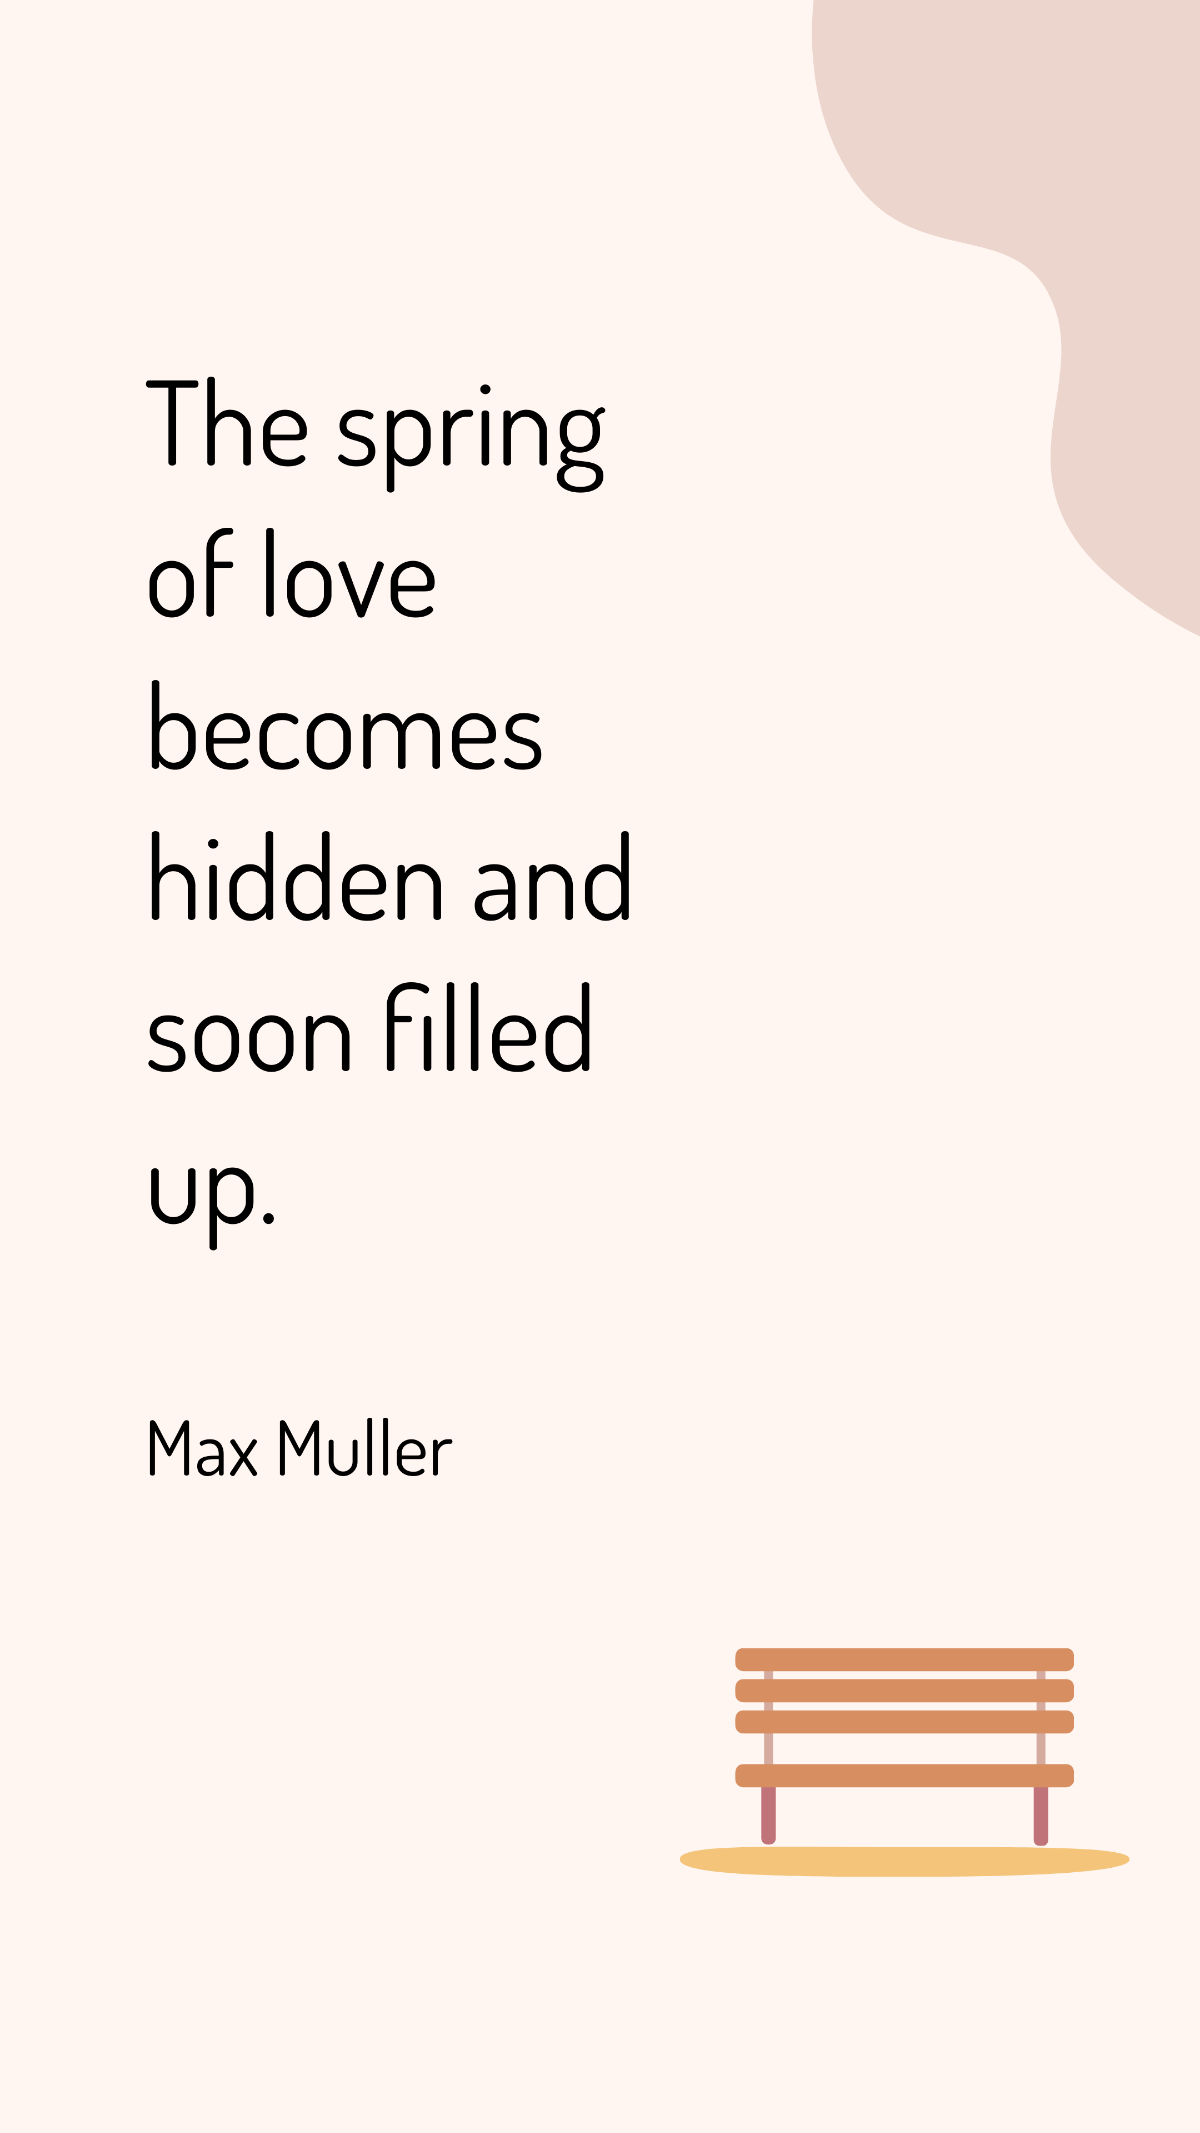 Free Max Muller - The spring of love becomes hidden and soon filled up. Template